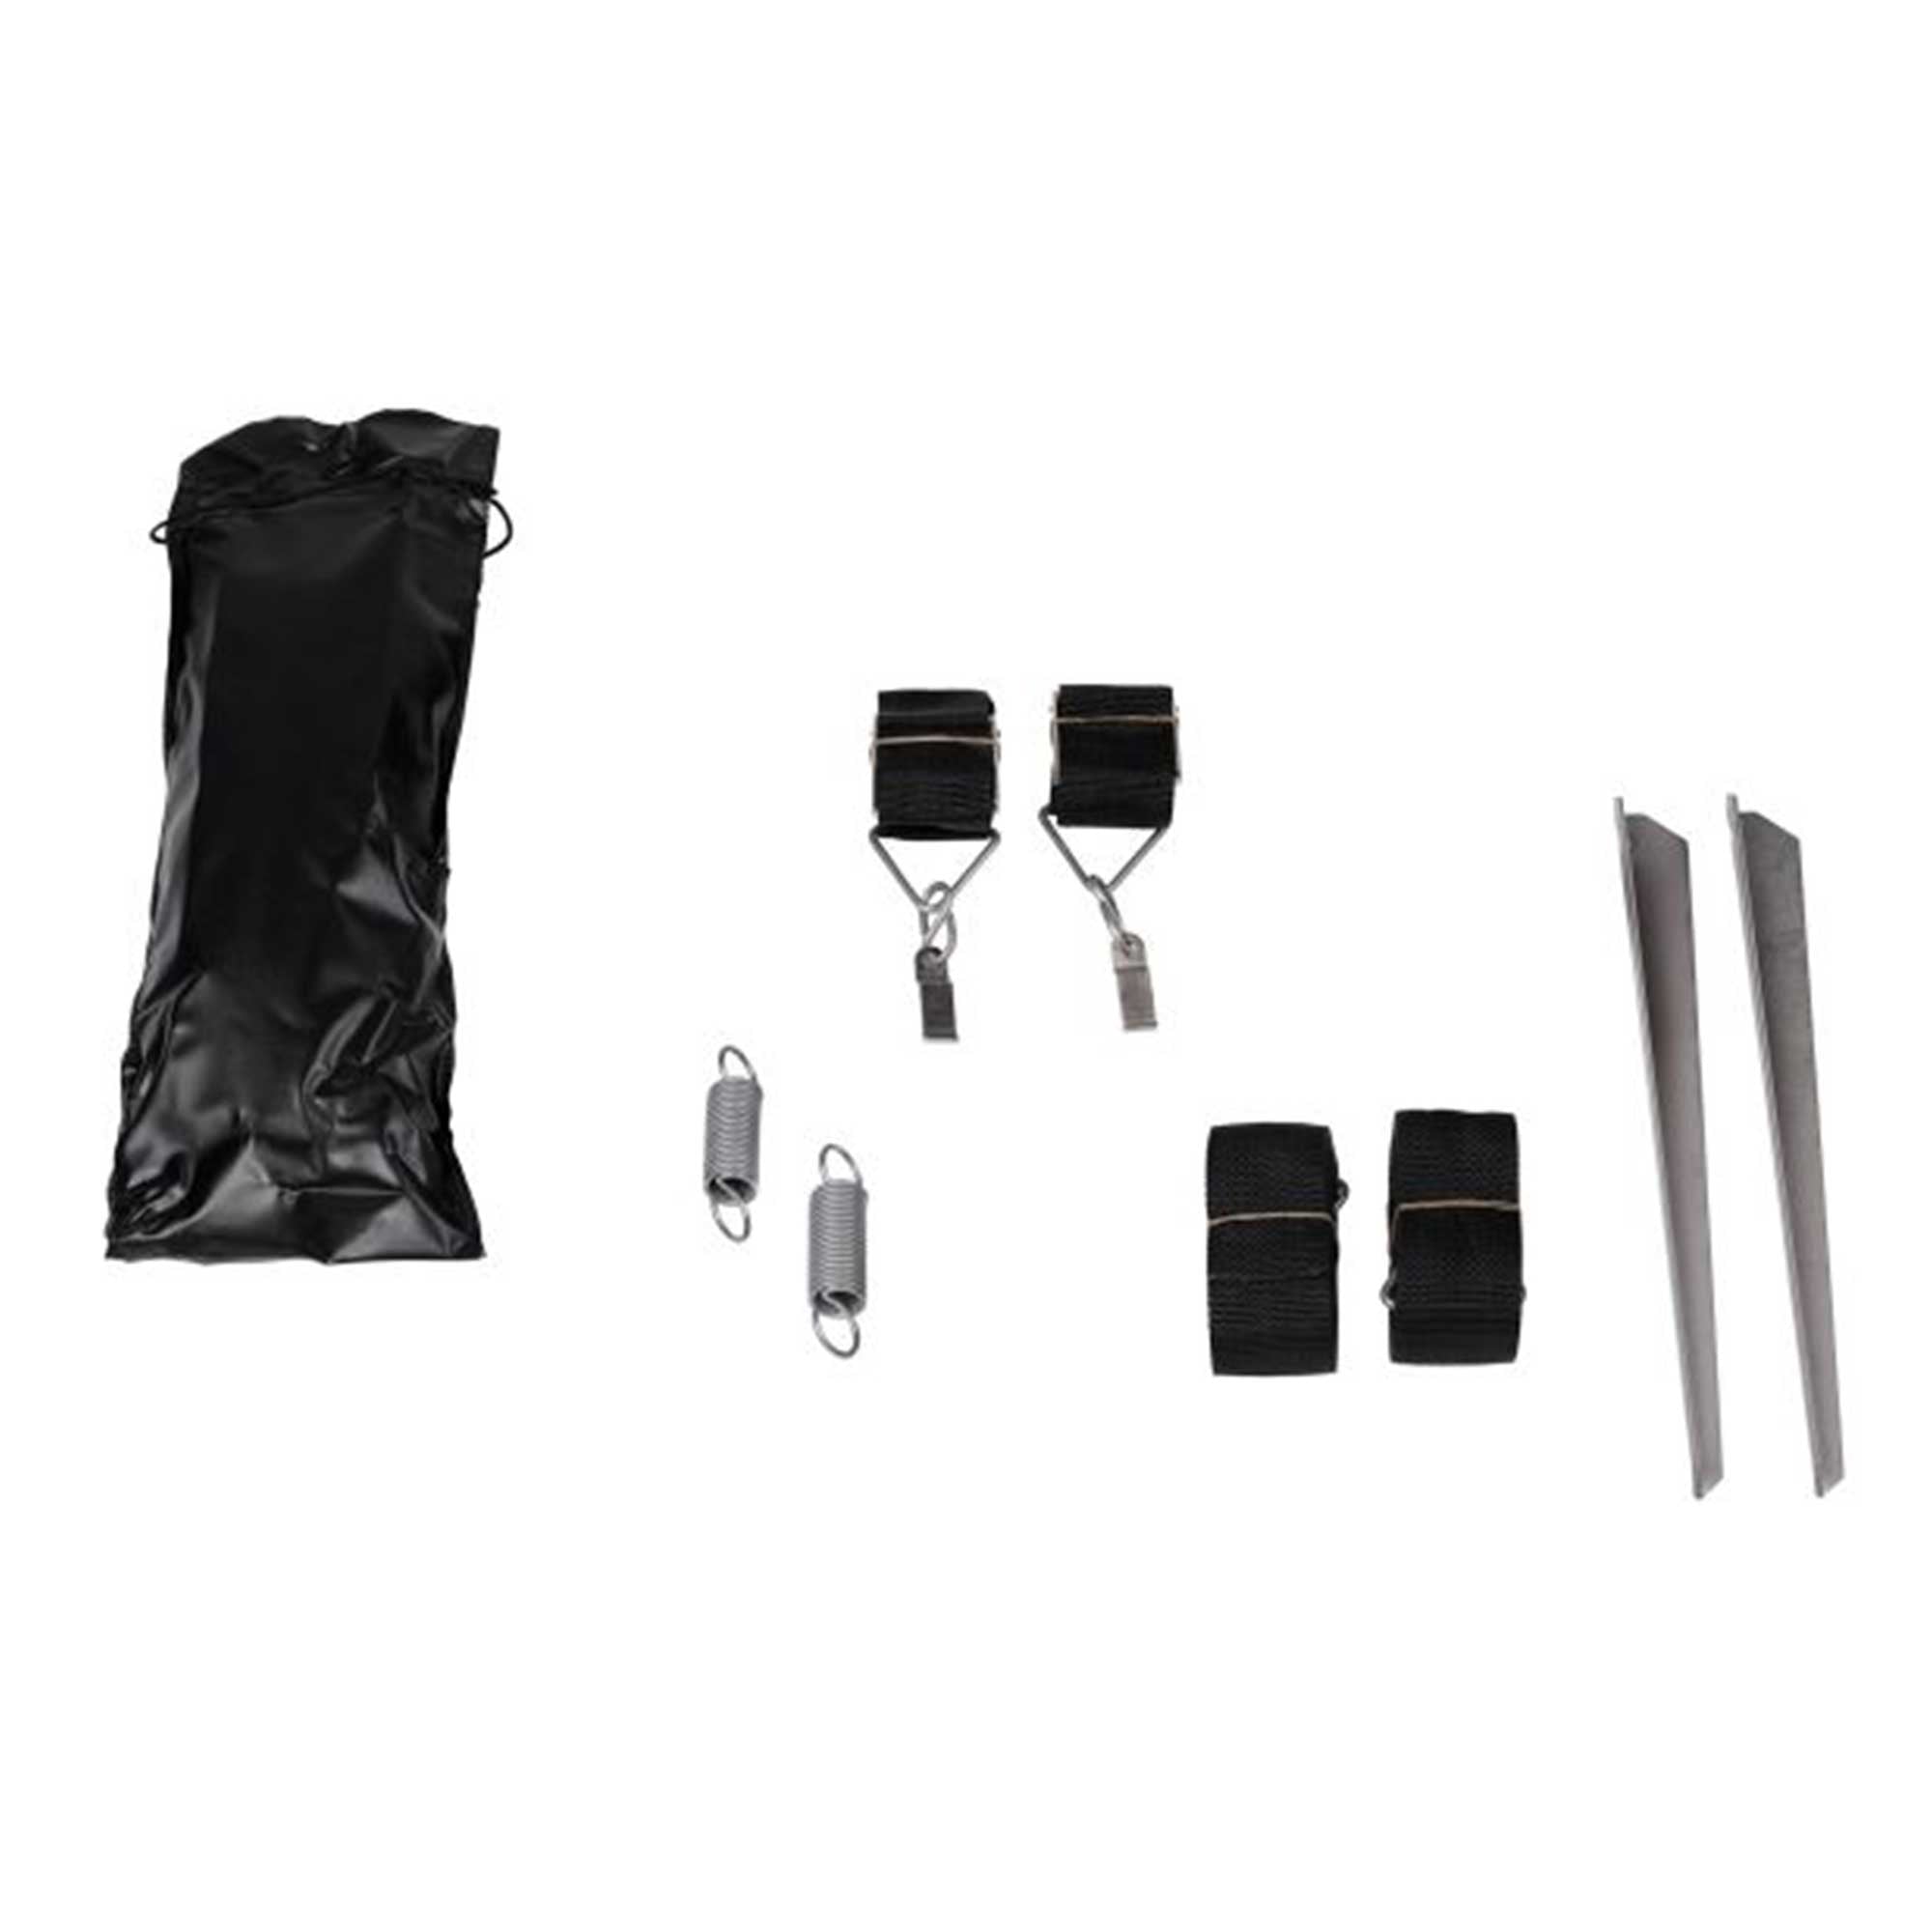 Thule Hold Down Side Strap Kit storm protection